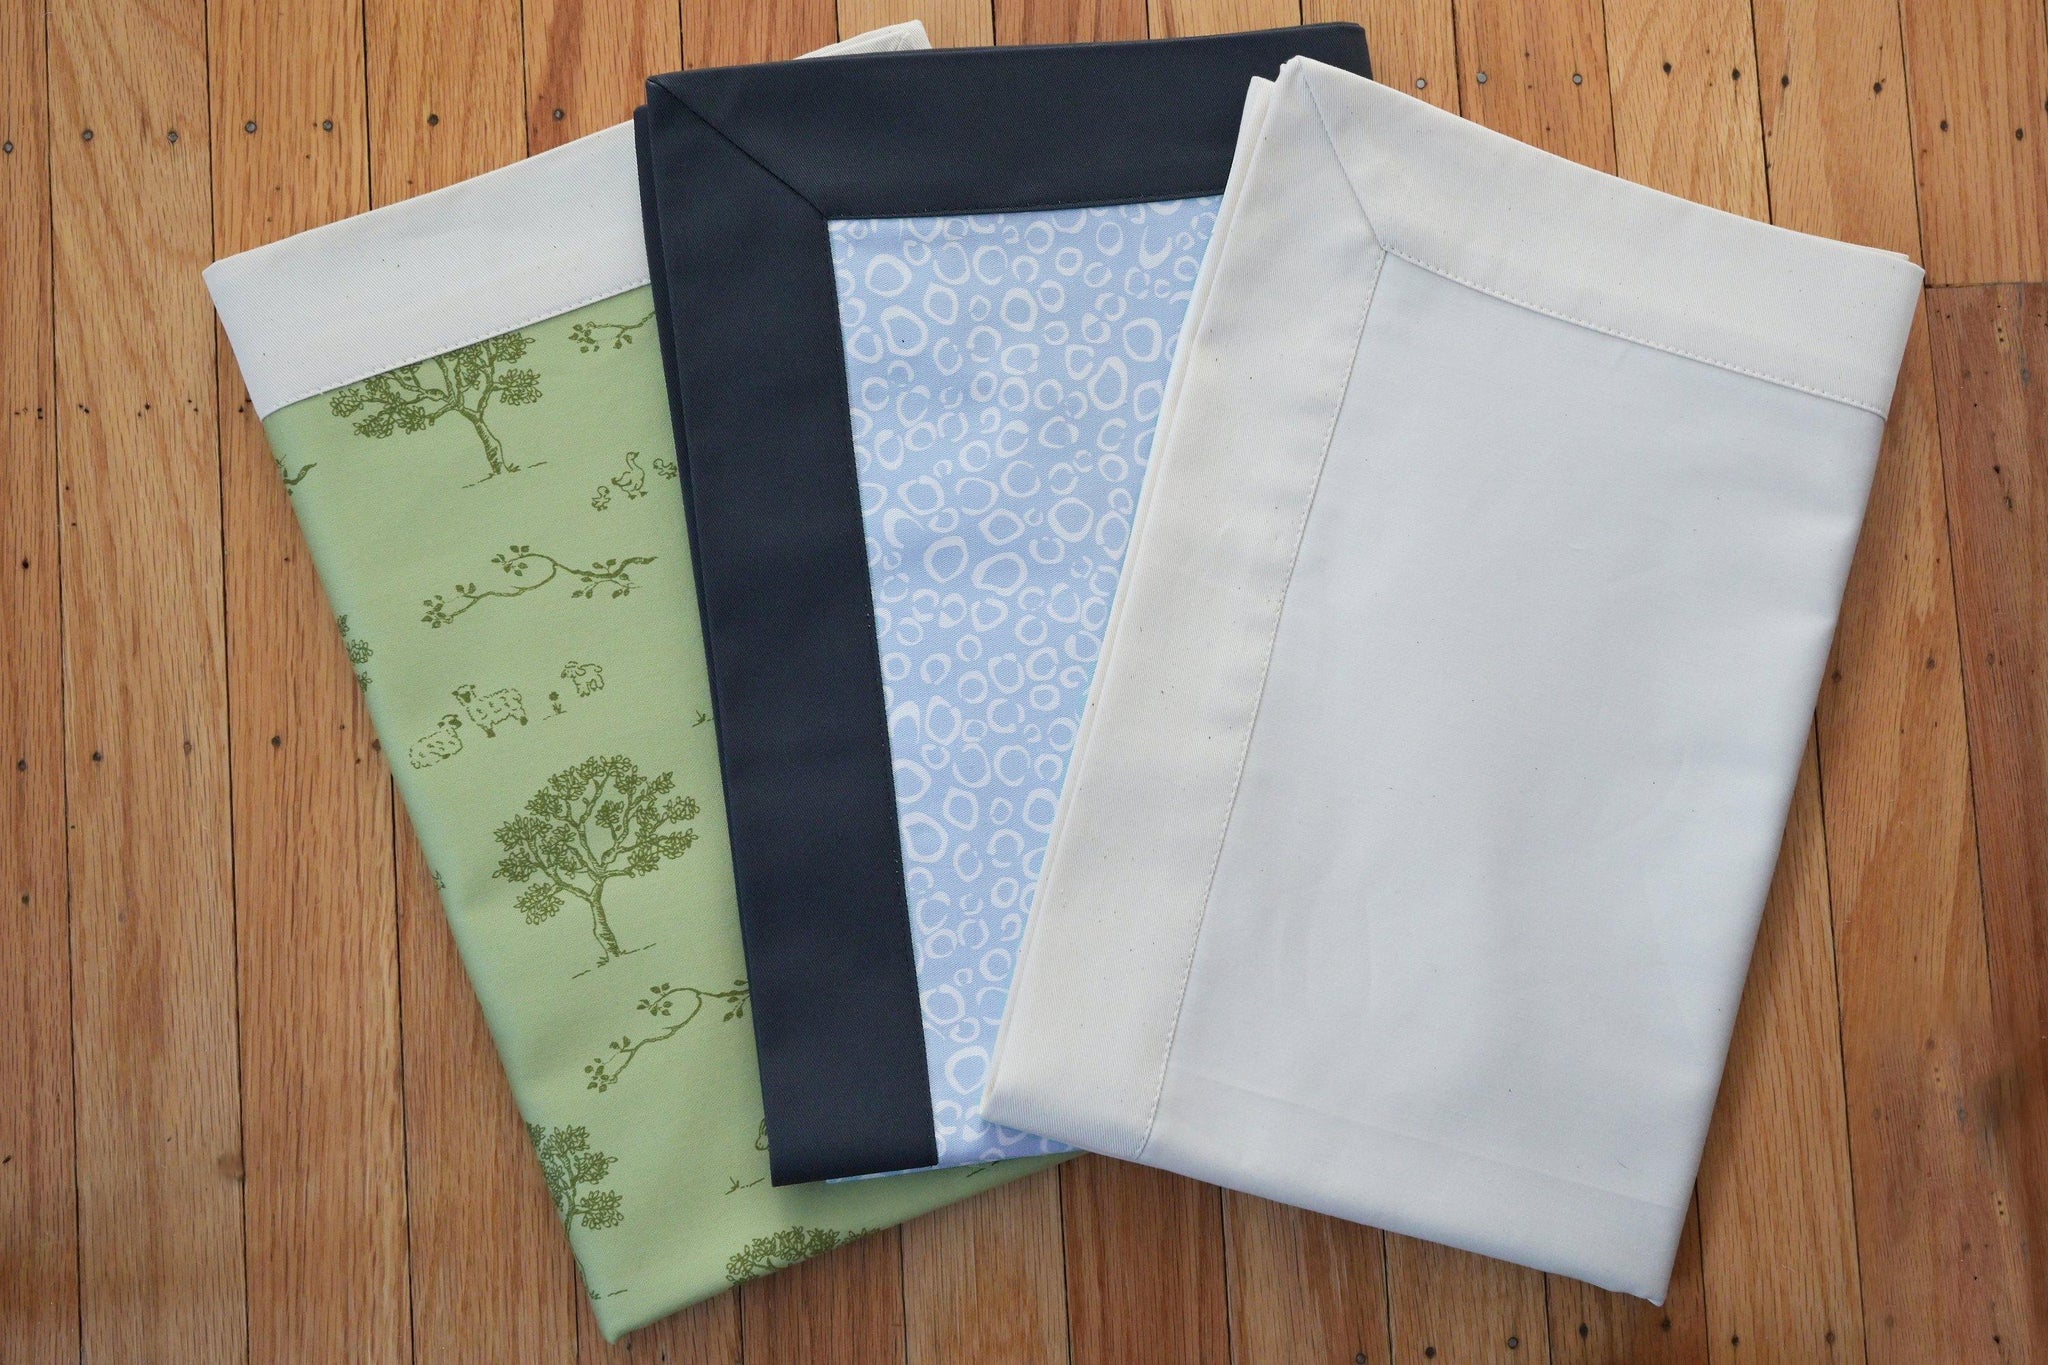 dog bed coverlet fabric samples in green tree pattern, blue with navy trim, and white